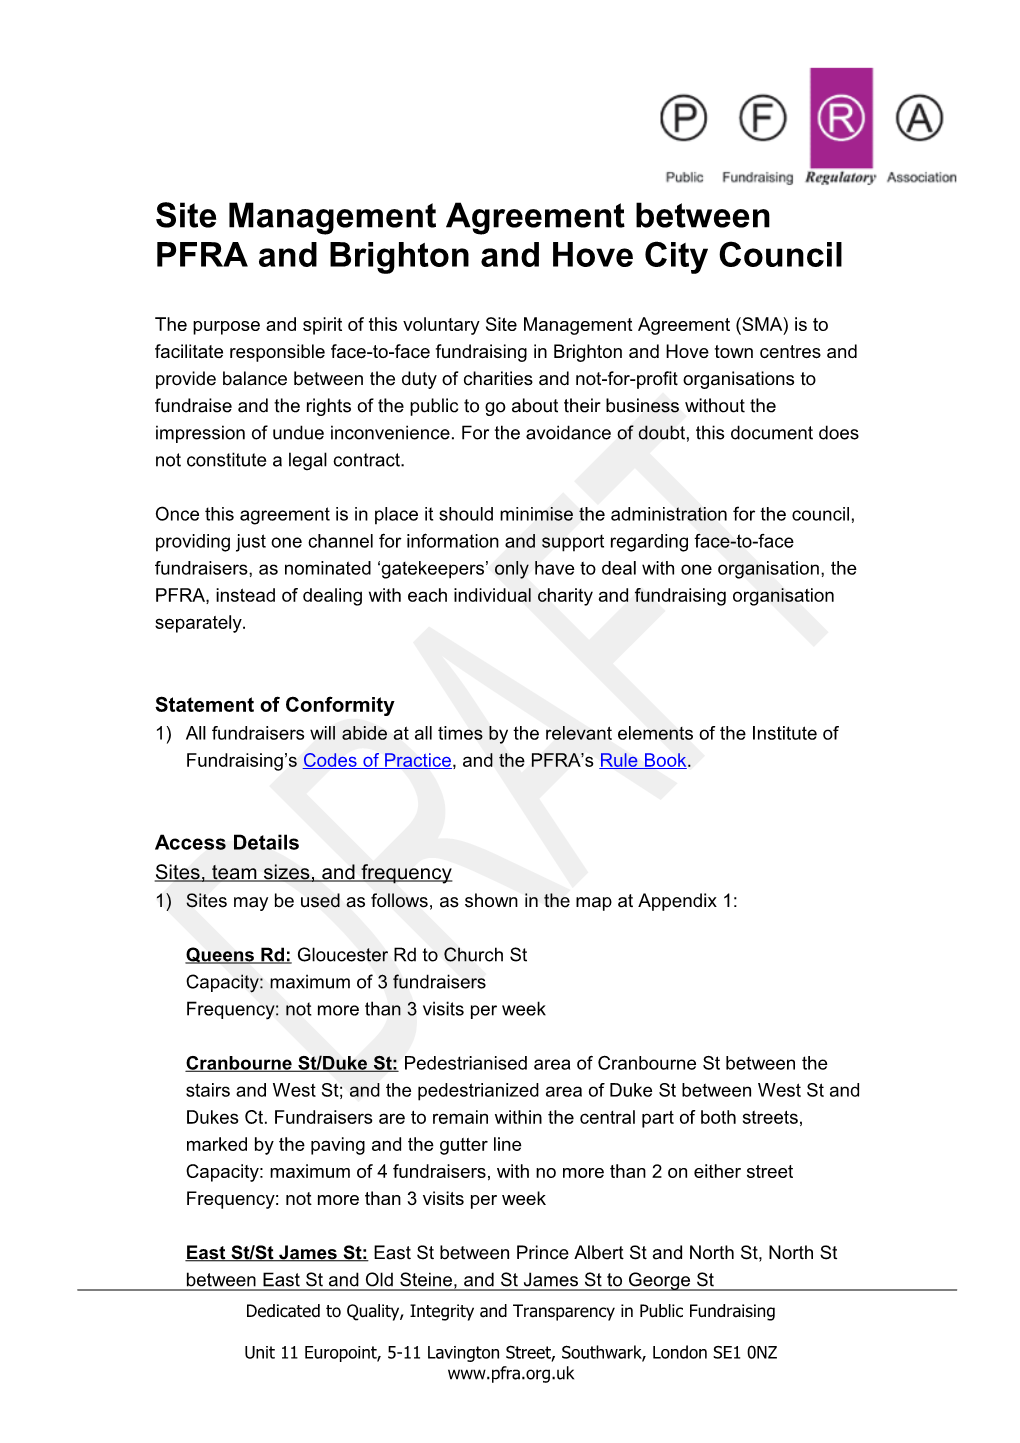 Site Agreement Between PFRA And